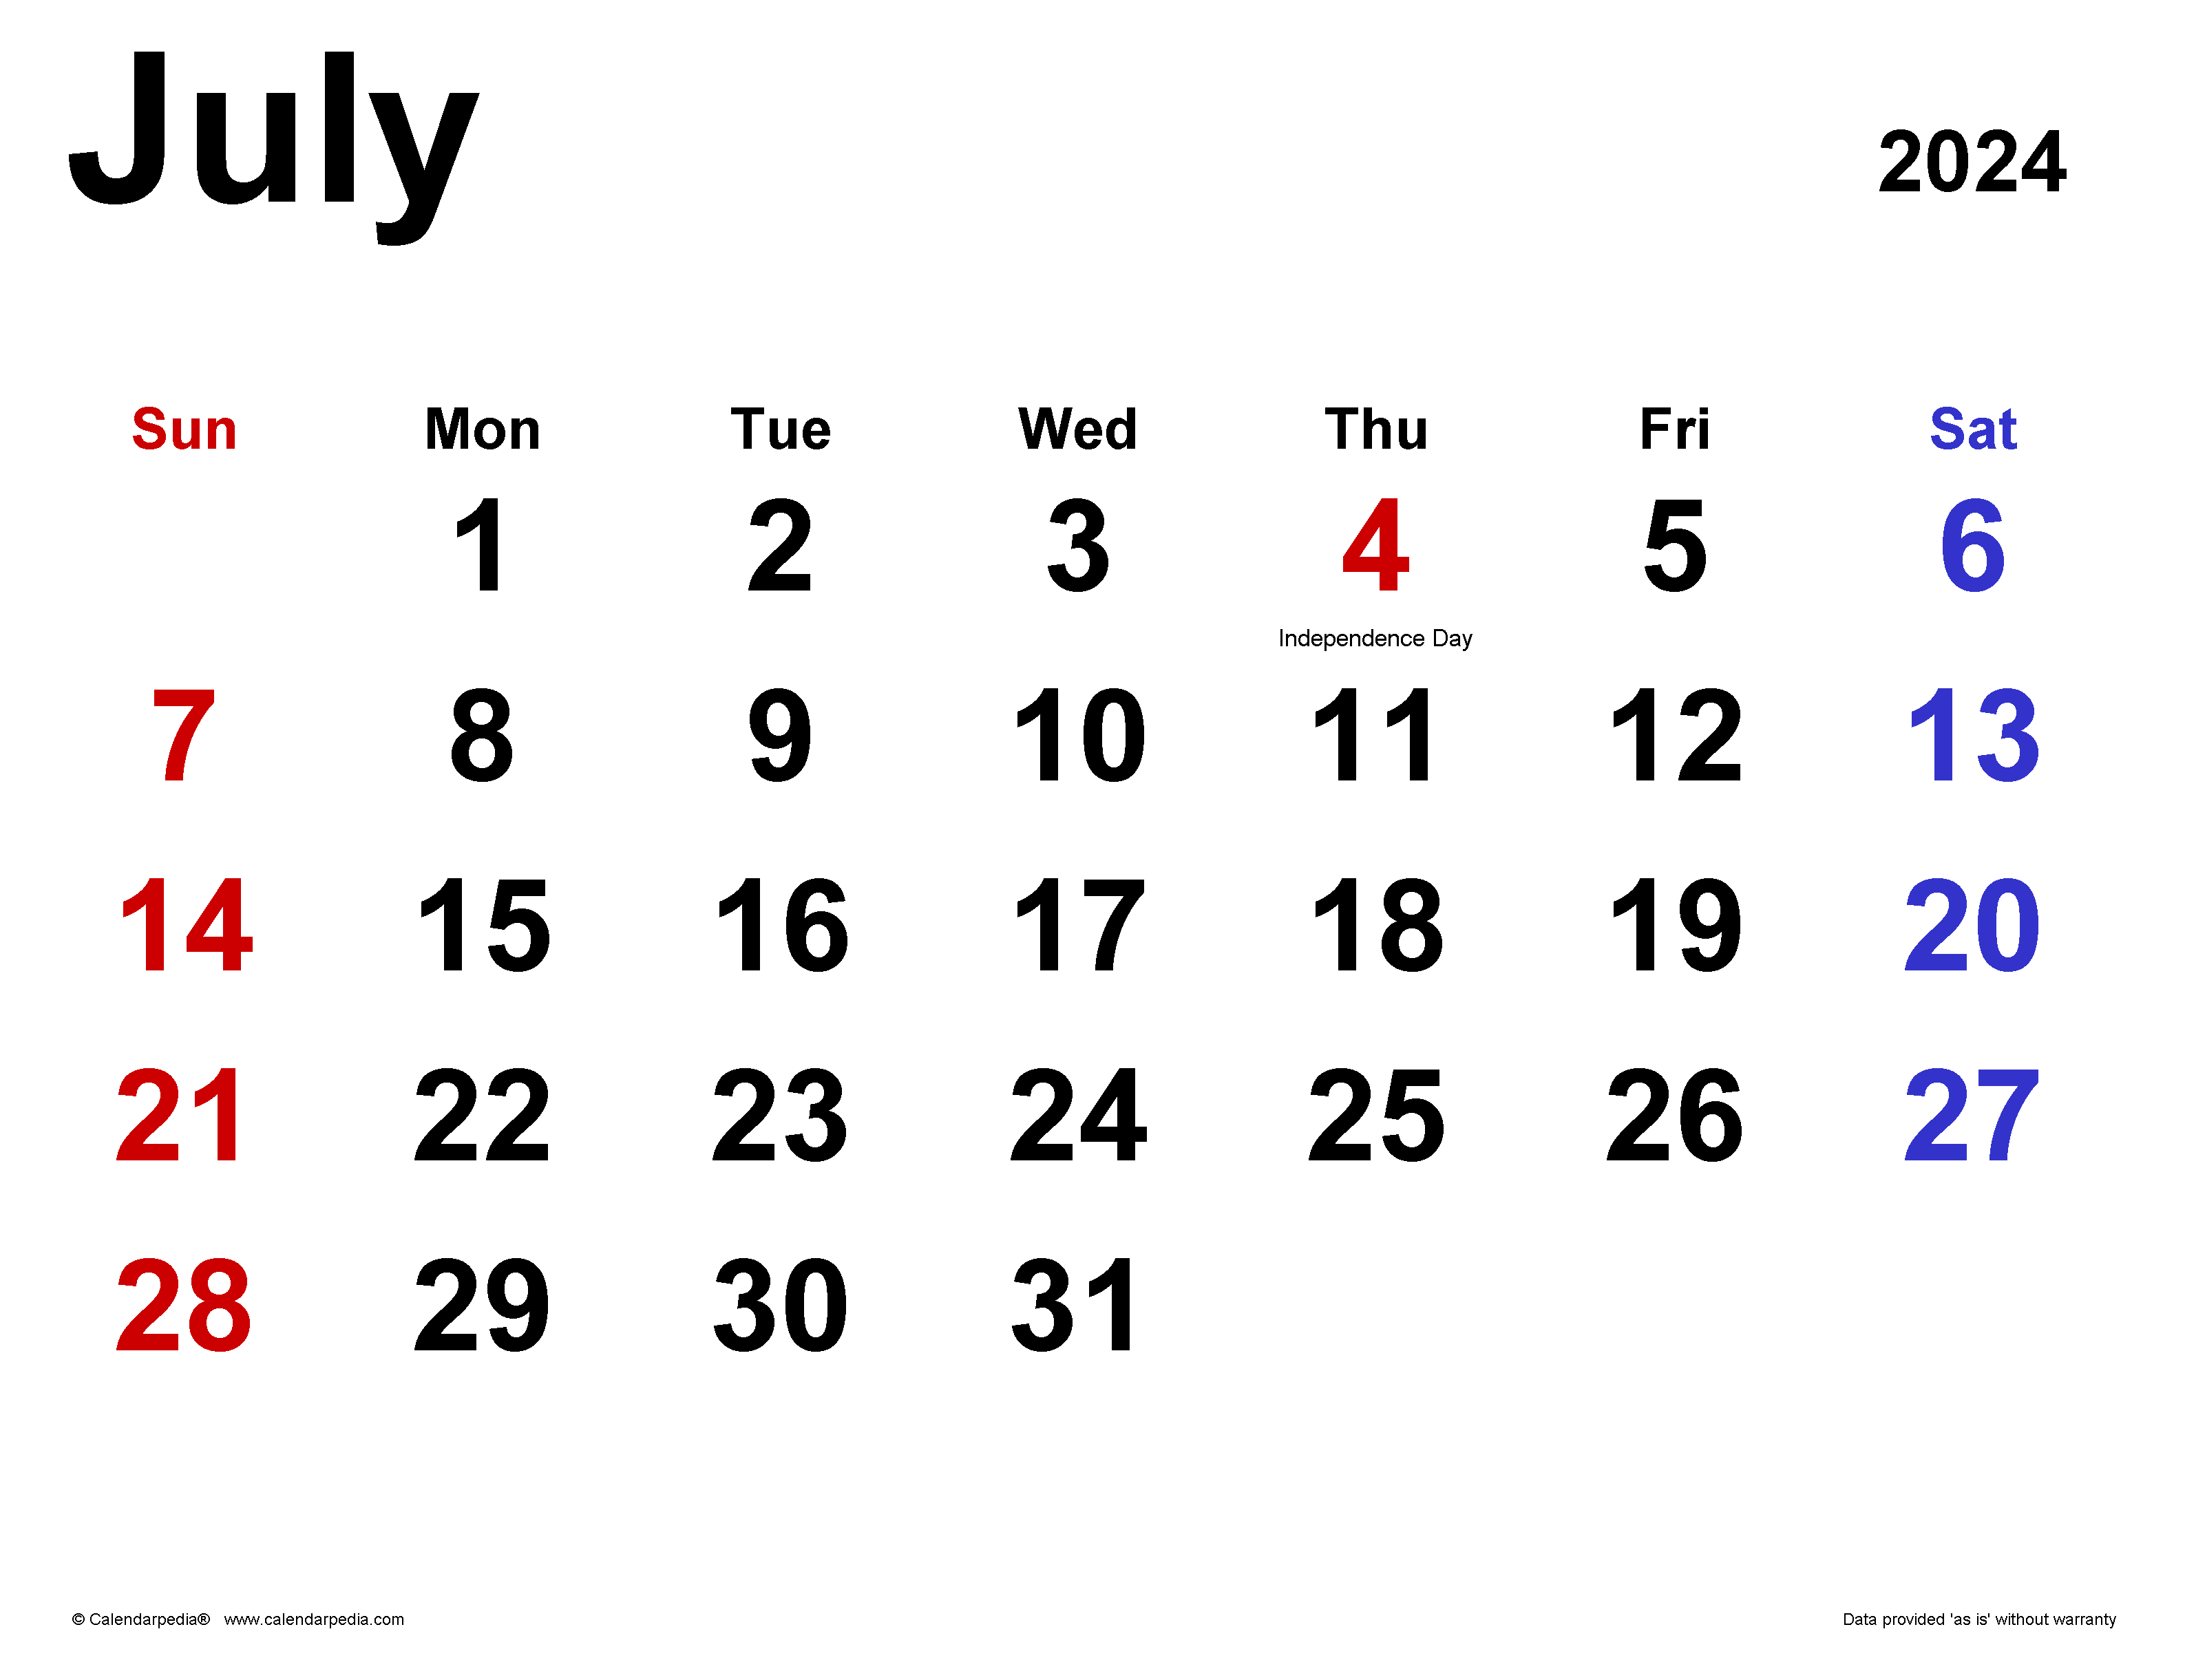 July 2024 Calendar | Templates For Word, Excel And Pdf with regard to Julio 2024 Calendar